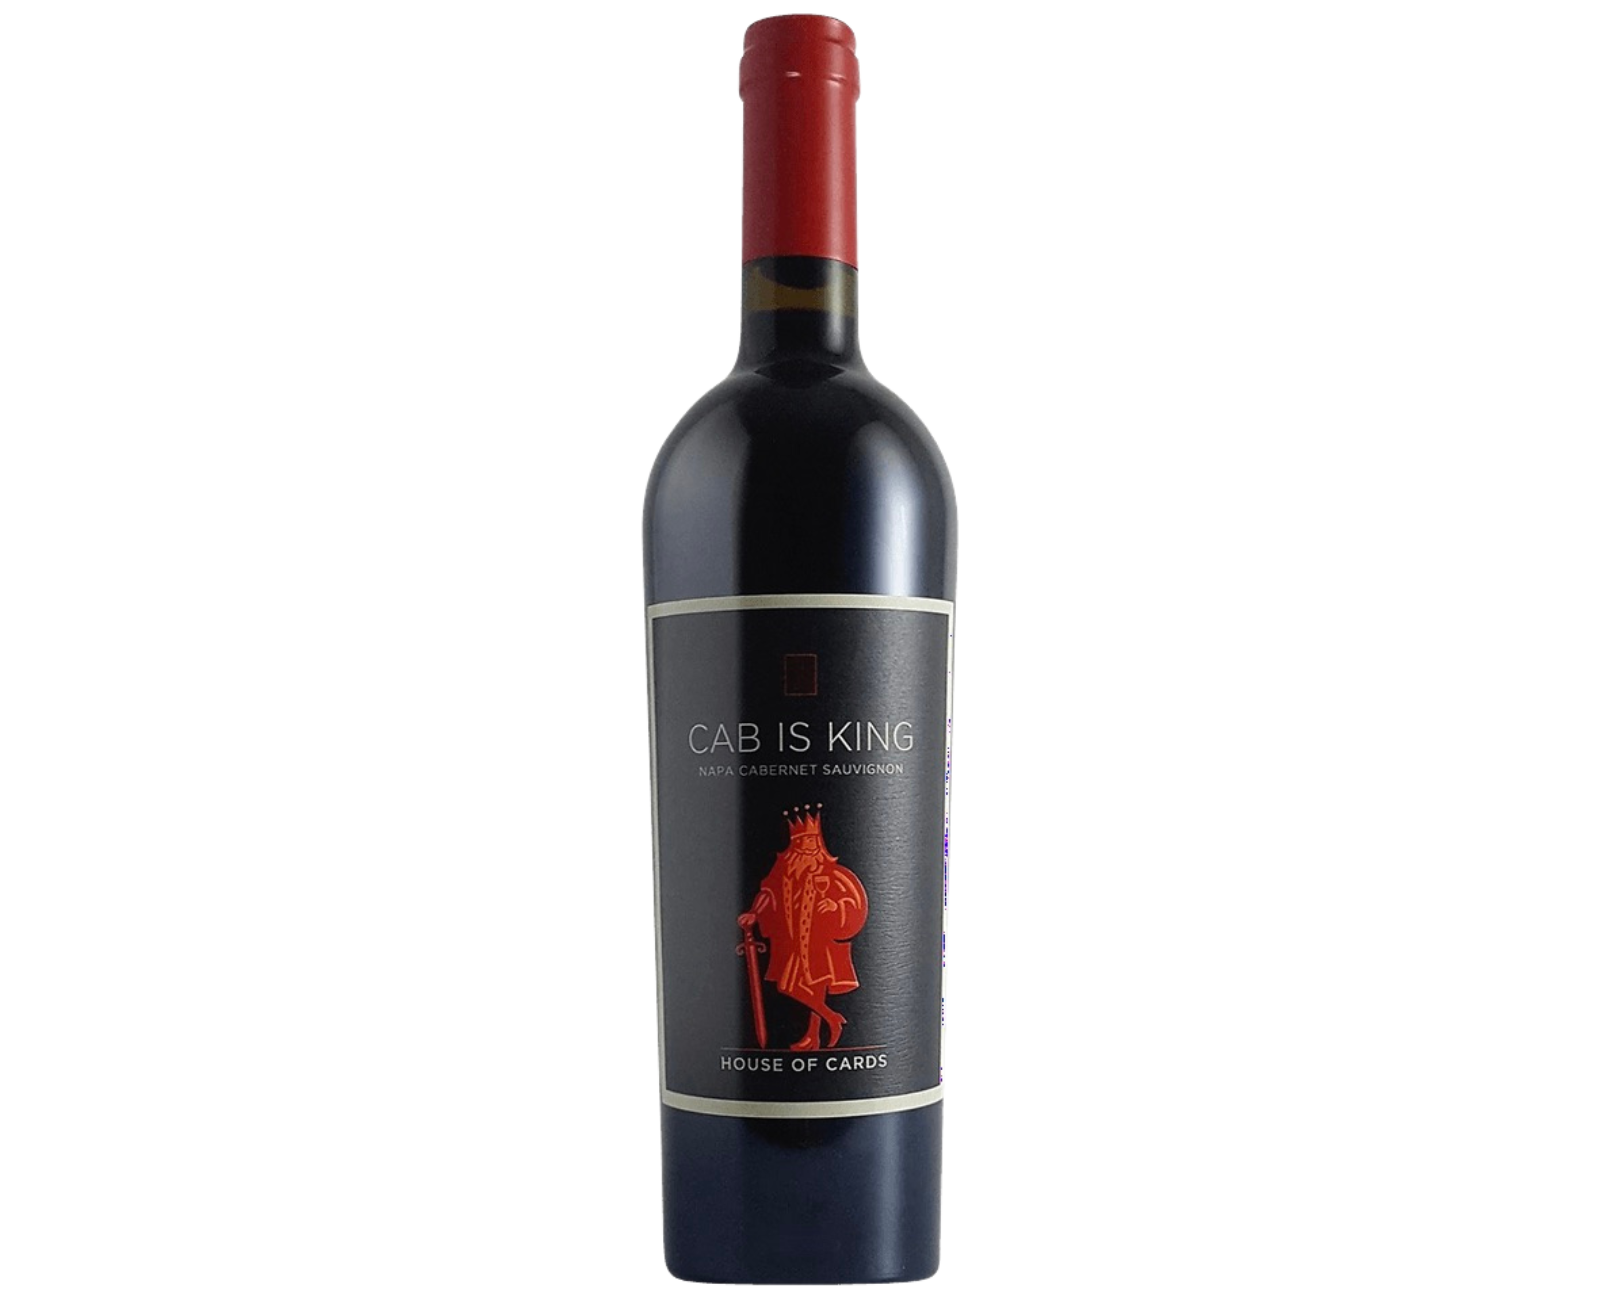 House of Cards 2022 'Cab is King' Cabernet Sauvignon, Napa County